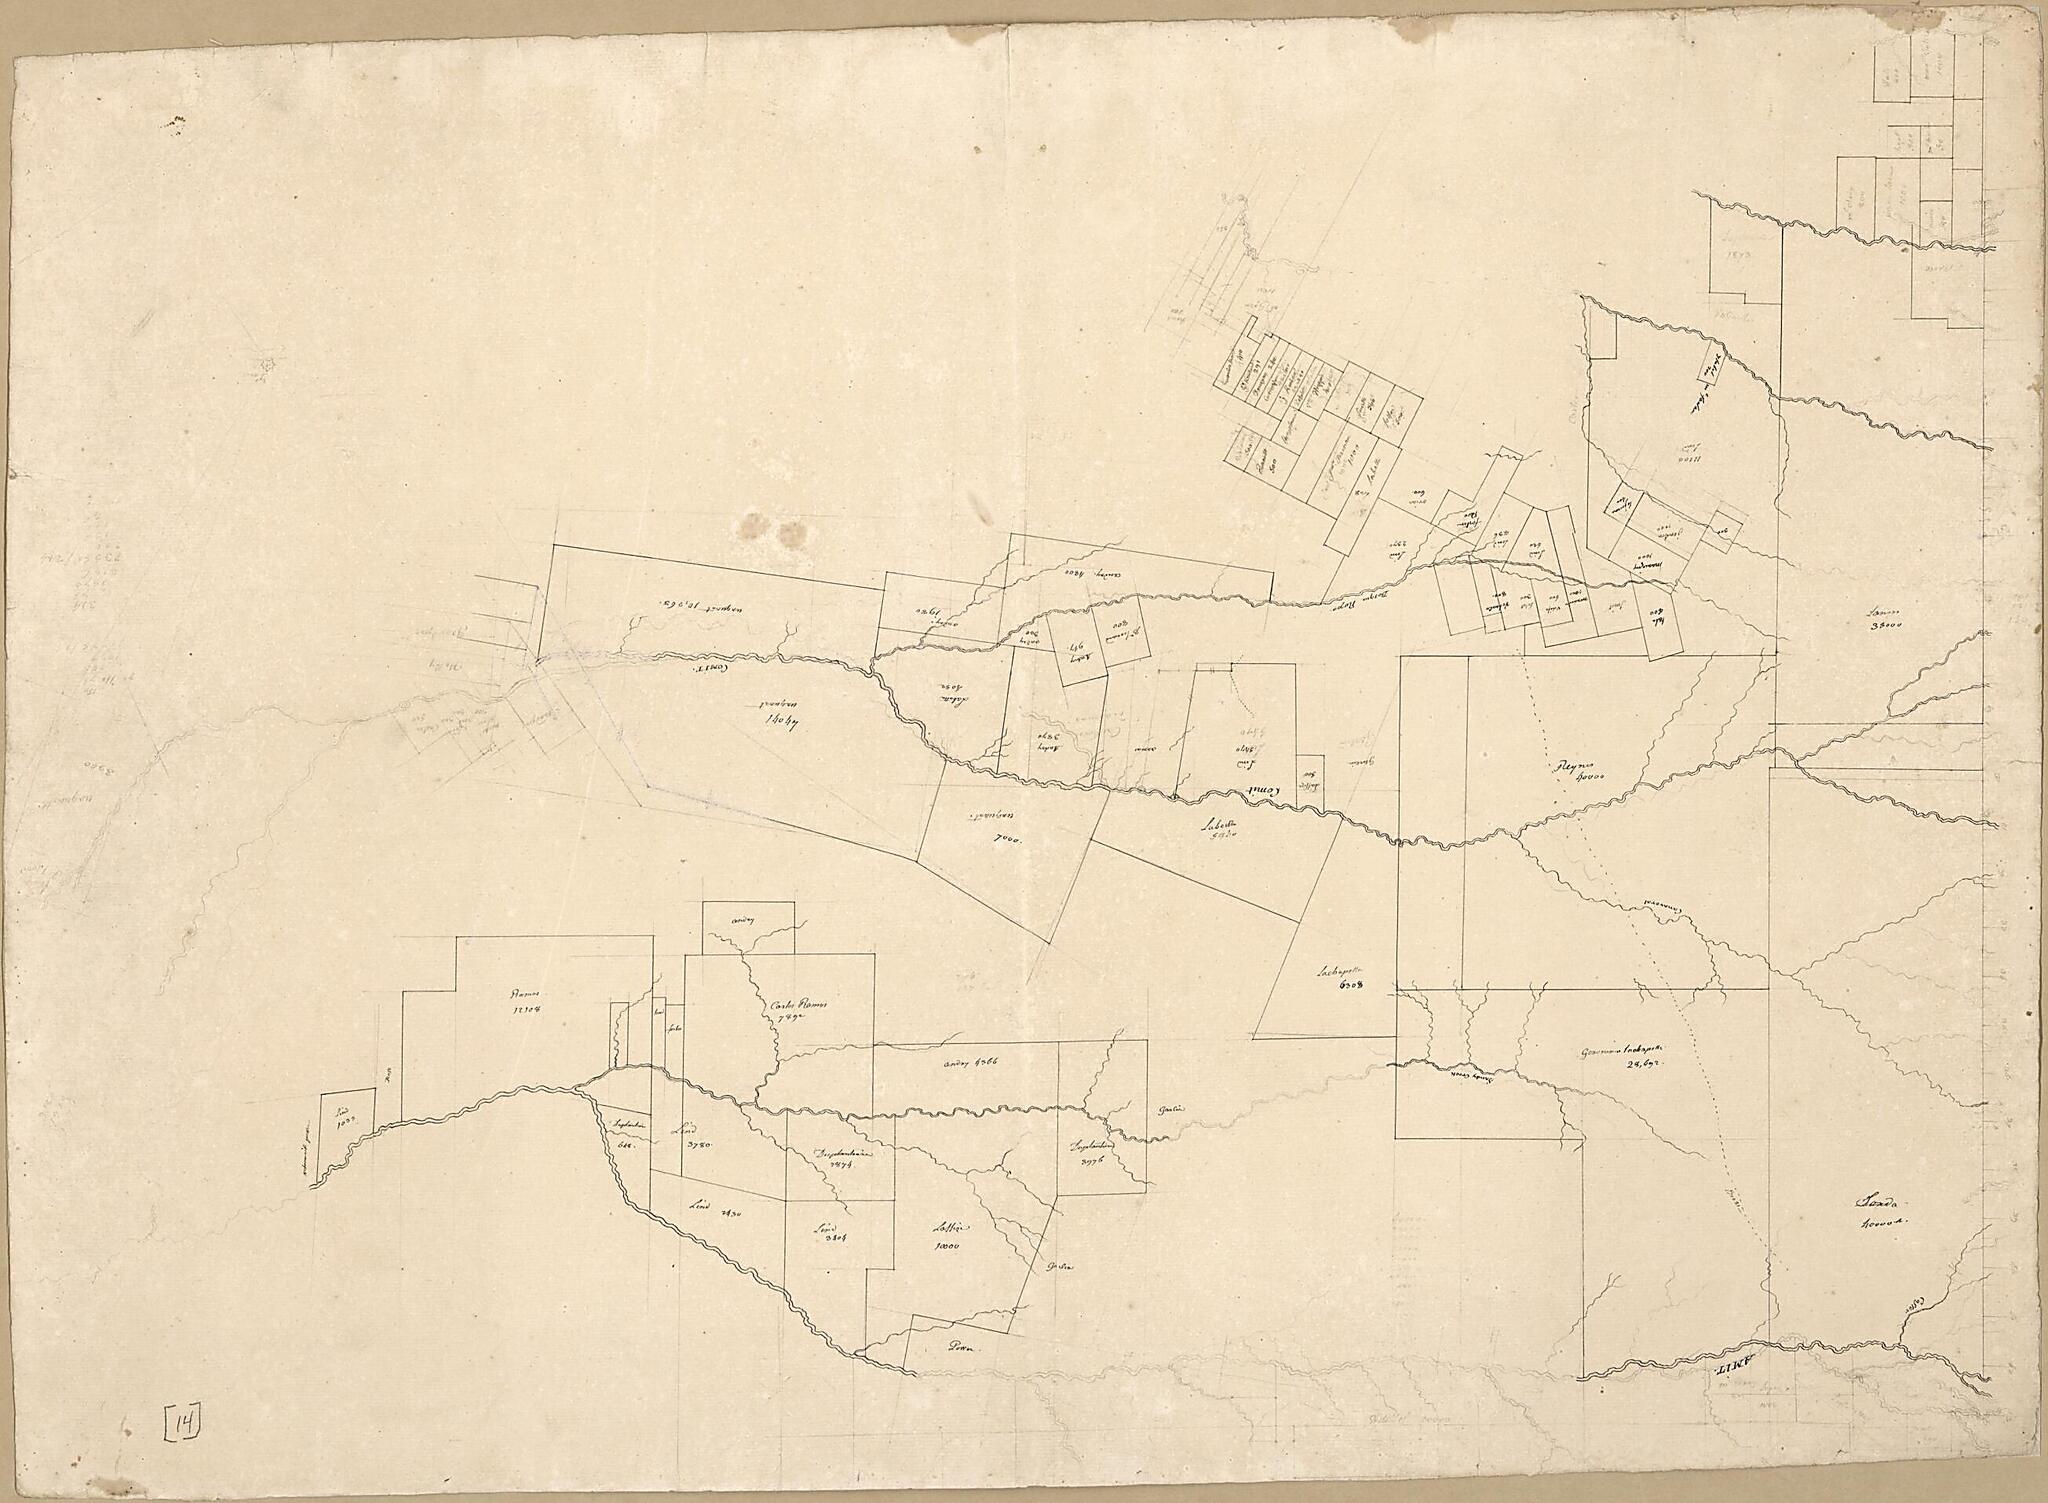 This old map of Map of Area of Spanish West Florida Bounded by the Comite River On the West and the Amite River On the East from 1805 was created by Vicente Sebastián Pintado in 1805